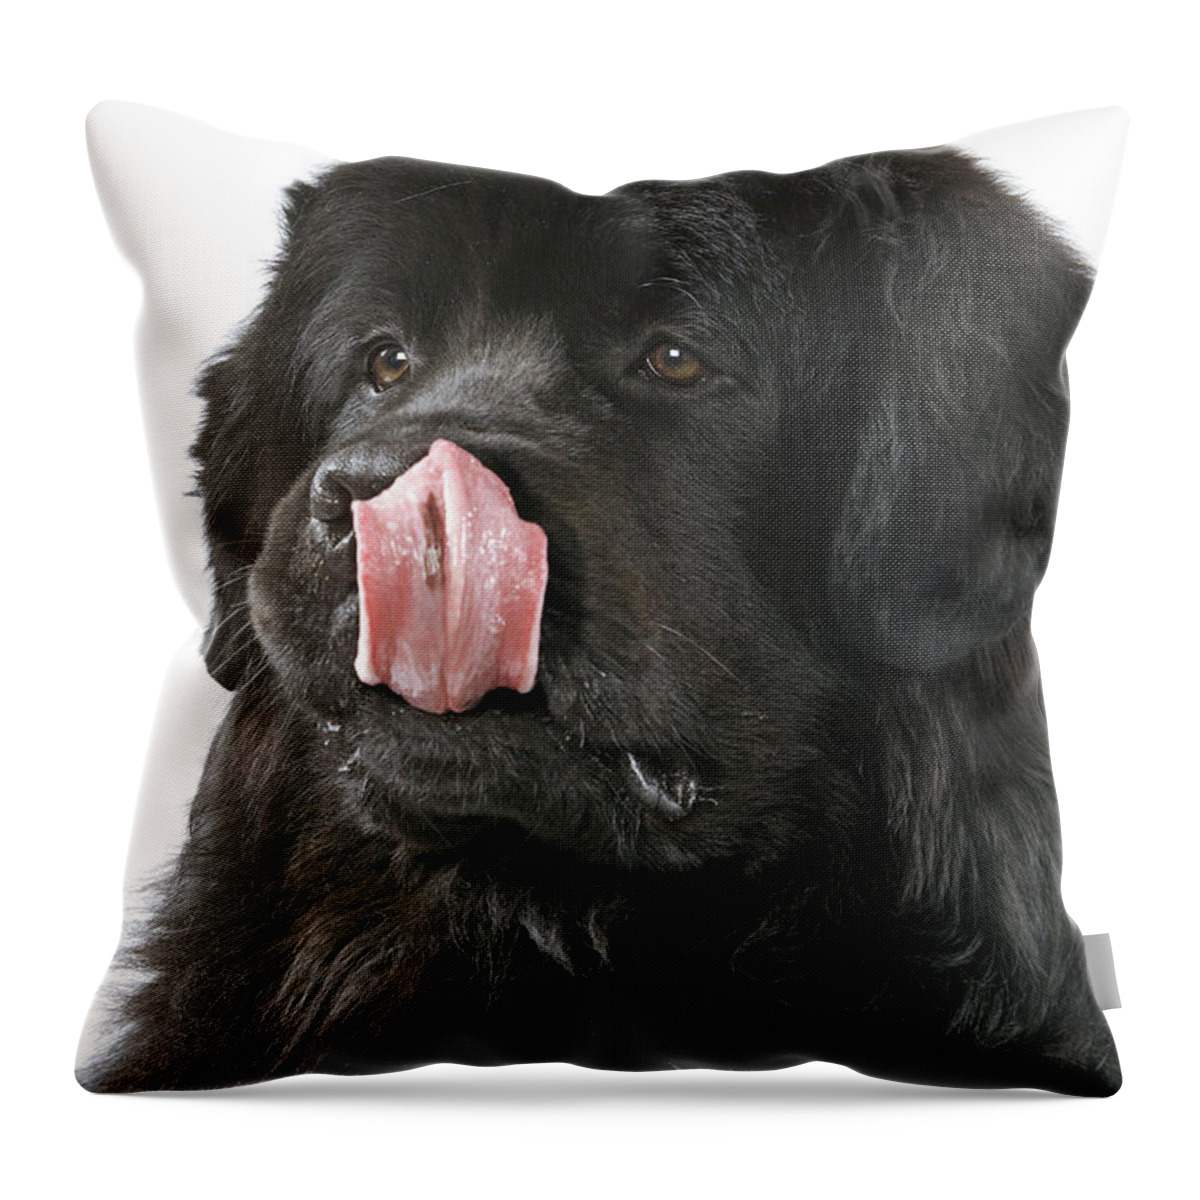 Newfoundland Throw Pillow featuring the photograph Newfoundland Dog by Jean-Michel Labat